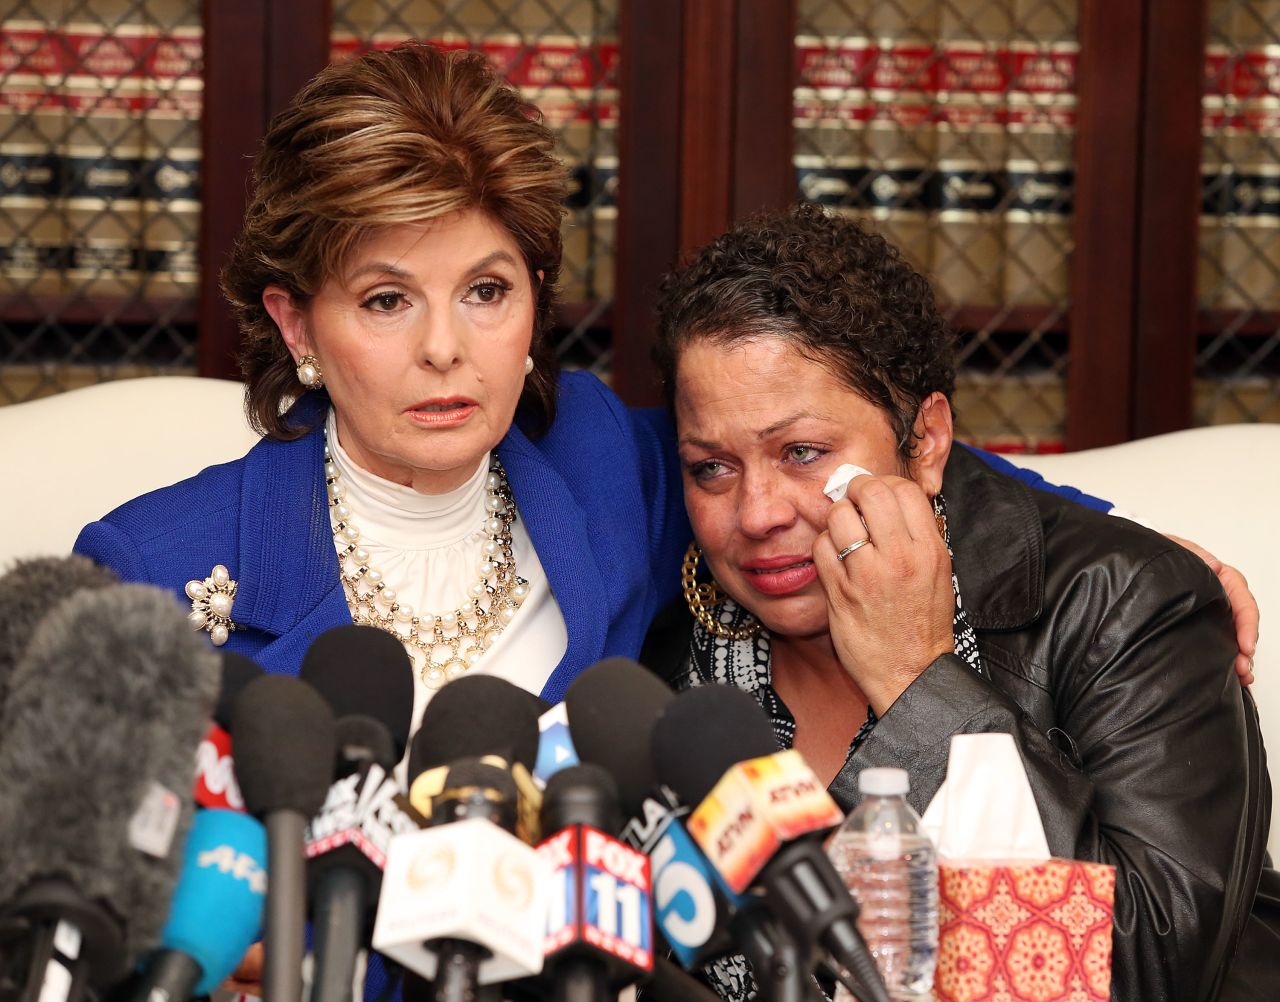 Identifying herself only by a first name during a news conference with lawyer Gloria Allred, Chelan said she was a 17-year-old aspiring model who worked at the Las Vegas Hilton when her father's wife sent pictures of her to Cosby. She said Cosby arranged to meet her at the Vegas Hilton "to introduce me to someone from the Ford modeling agency."  During that meeting, she said, Cosby gave her "a blue pill, which he said was an antihistamine, with a double shot of Amaretto." She alleged that Cosby lay down next to her on the bed and began touching her sexually and grunting.